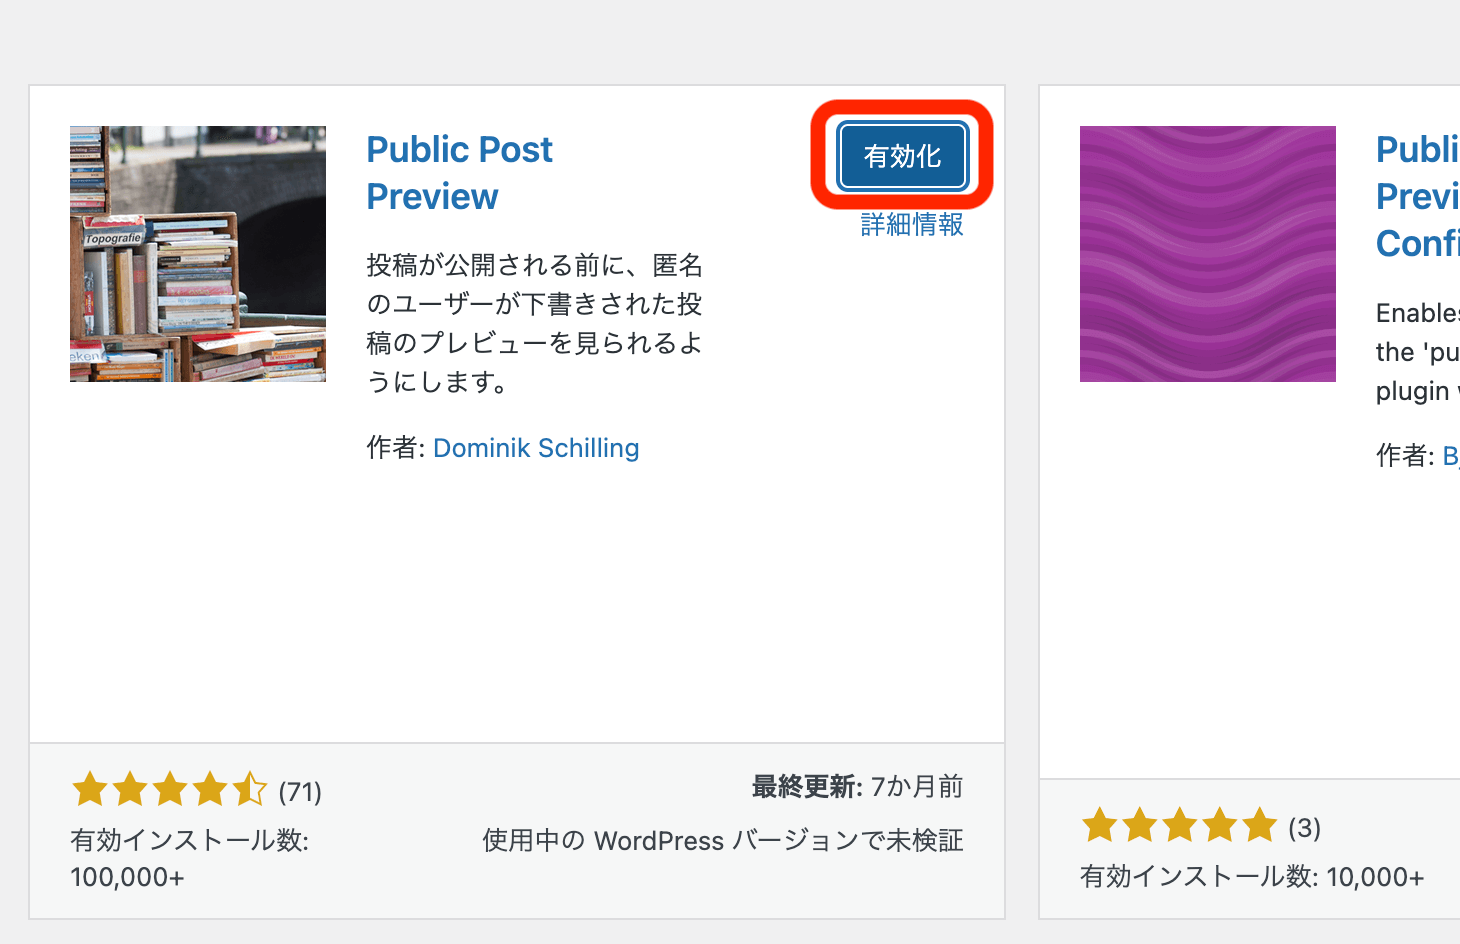 Public Post Previewを有効化